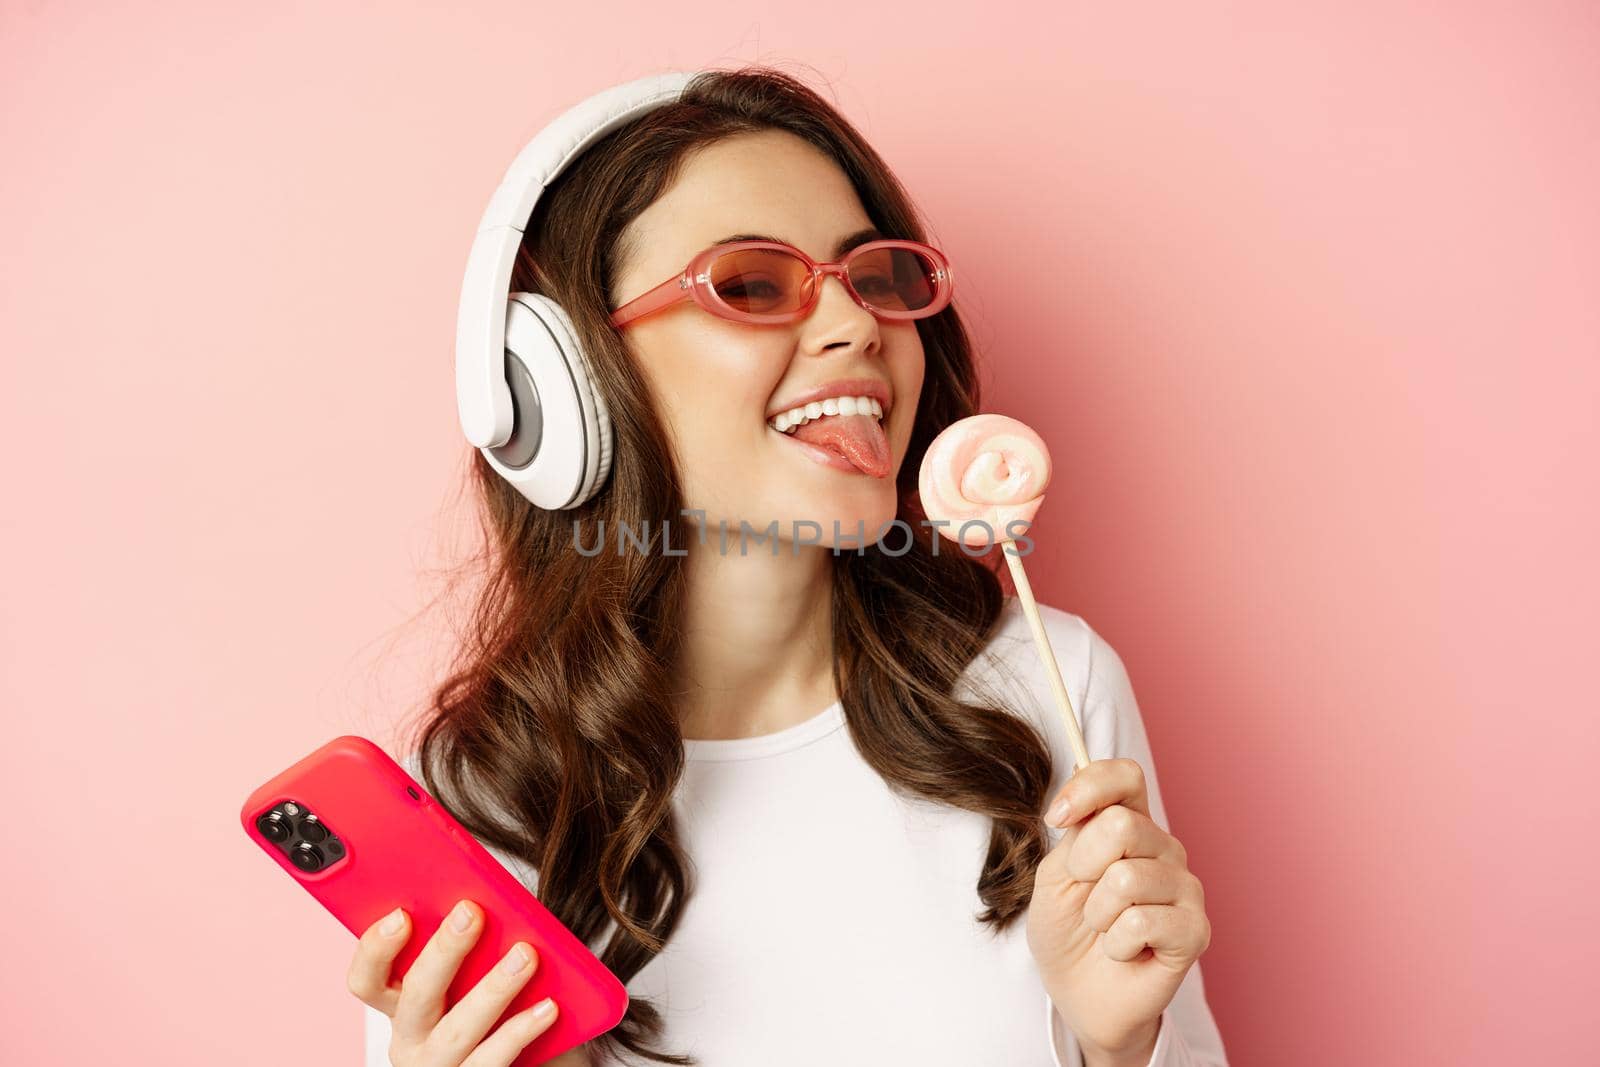 Beautiful female model listening music in headphones, holding lolipop and mobile phone, posing in sunglasses, standing over pink background.